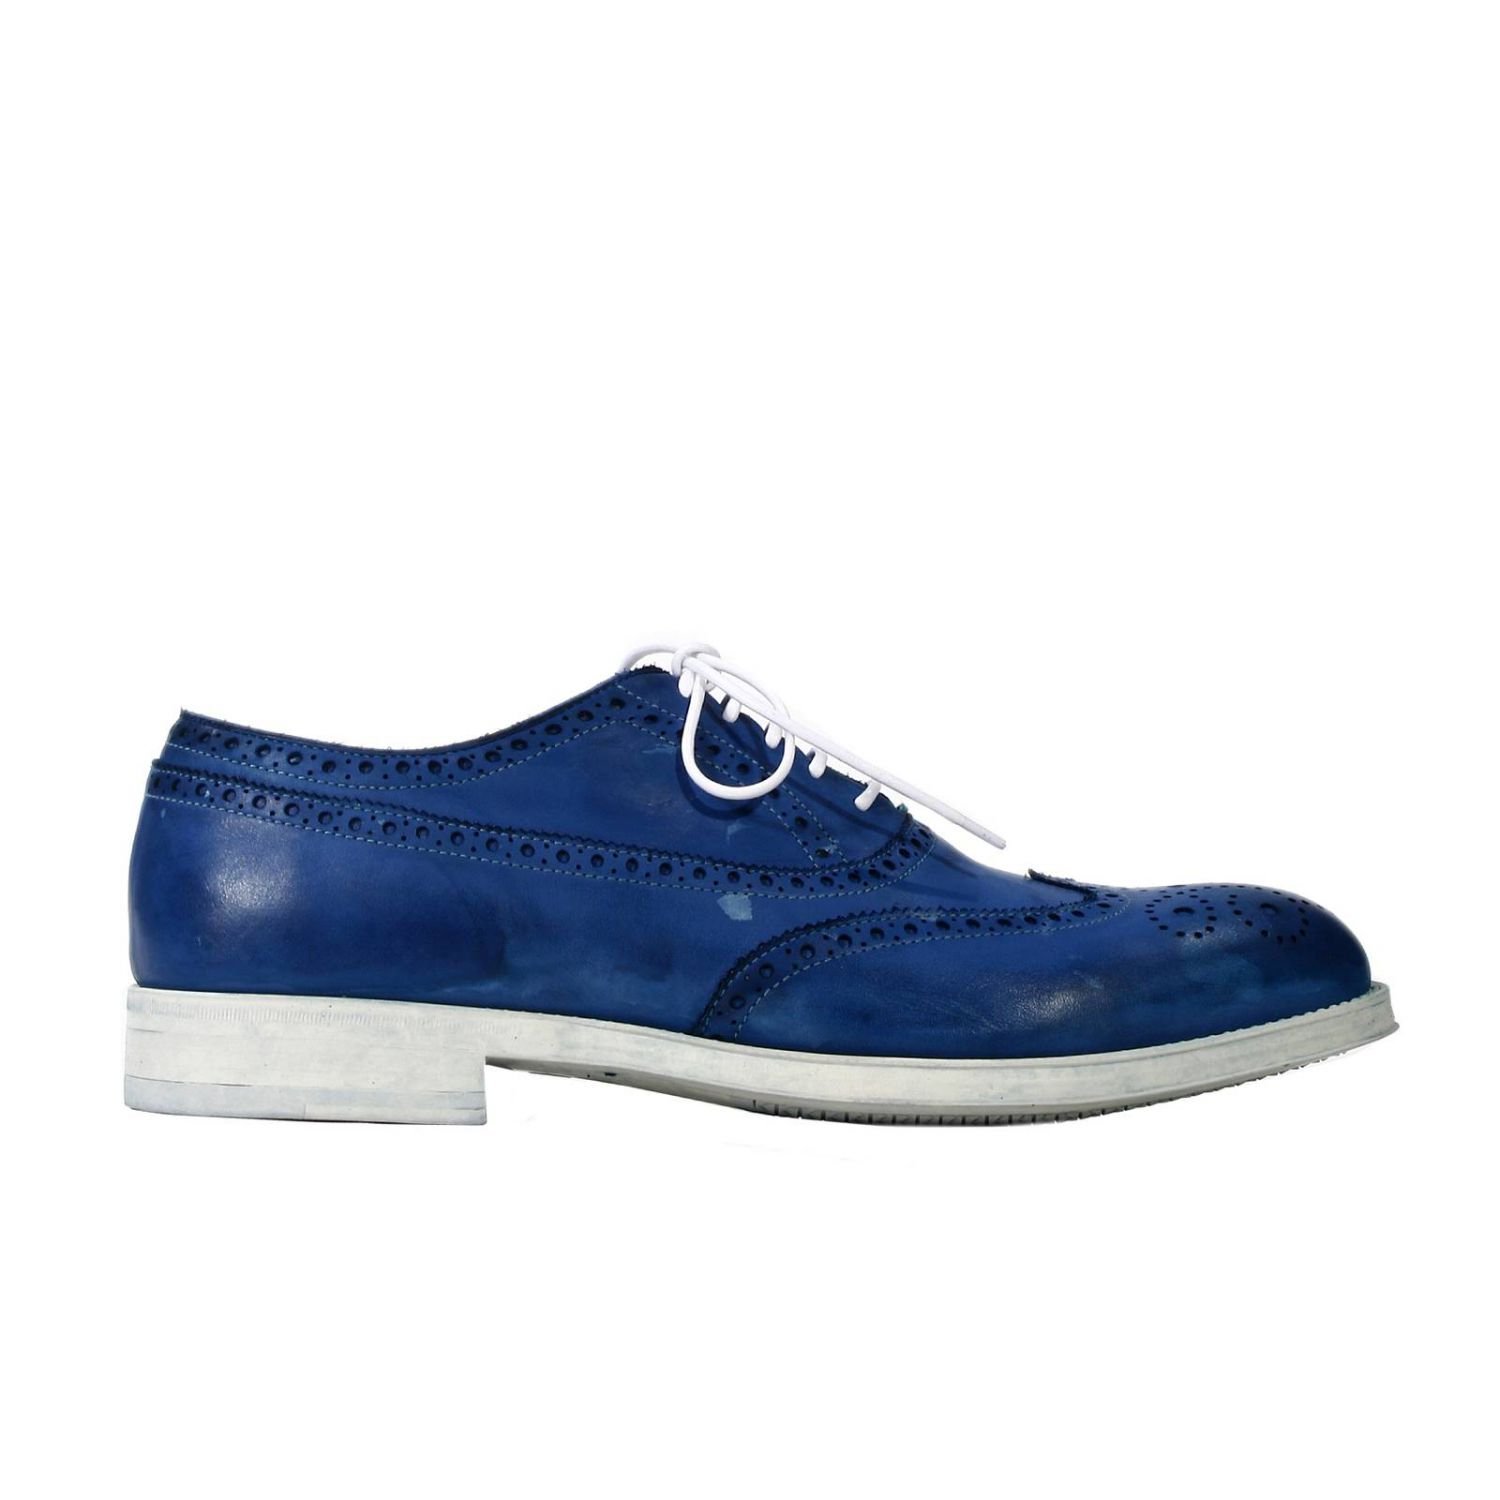 Lyst - Alberto guardiani Shoes Toki Tower Sneakers Leather 